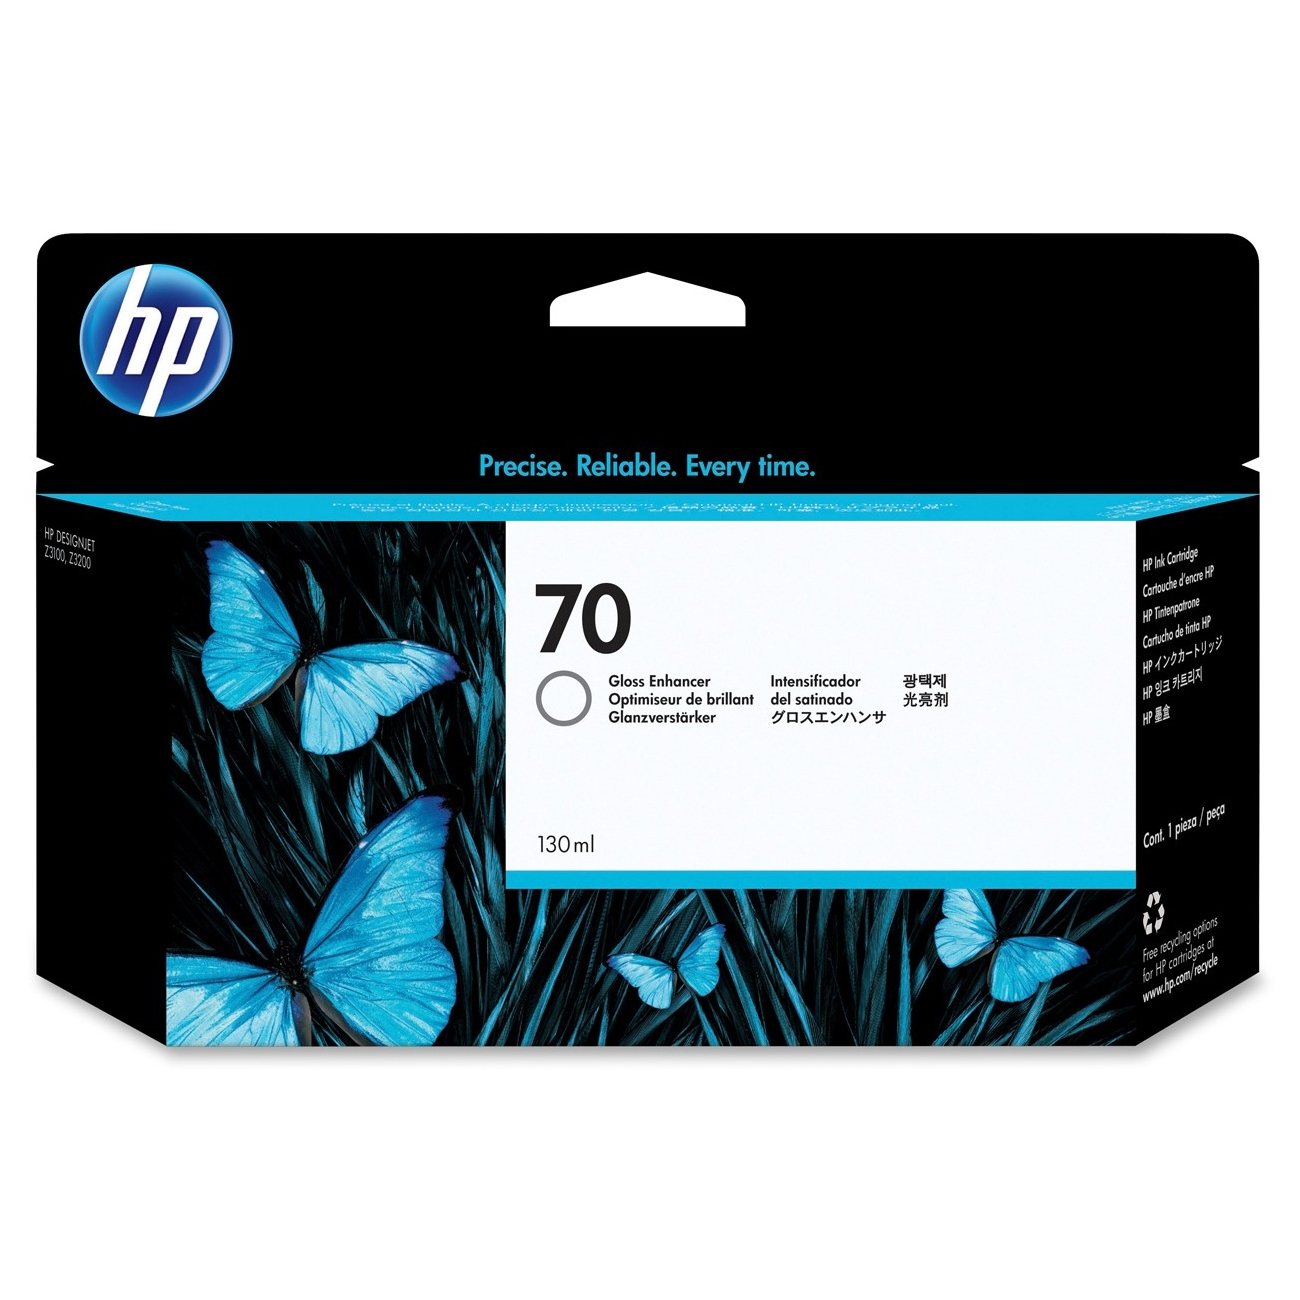 HP 70 Gloss Enhancer Cartridge  - 130ml Ink Tank - for HP DesignJet Z3100 & Z3200 Printers - C9459A - express delivery from GDS - Graphic Design Supplies Ltd